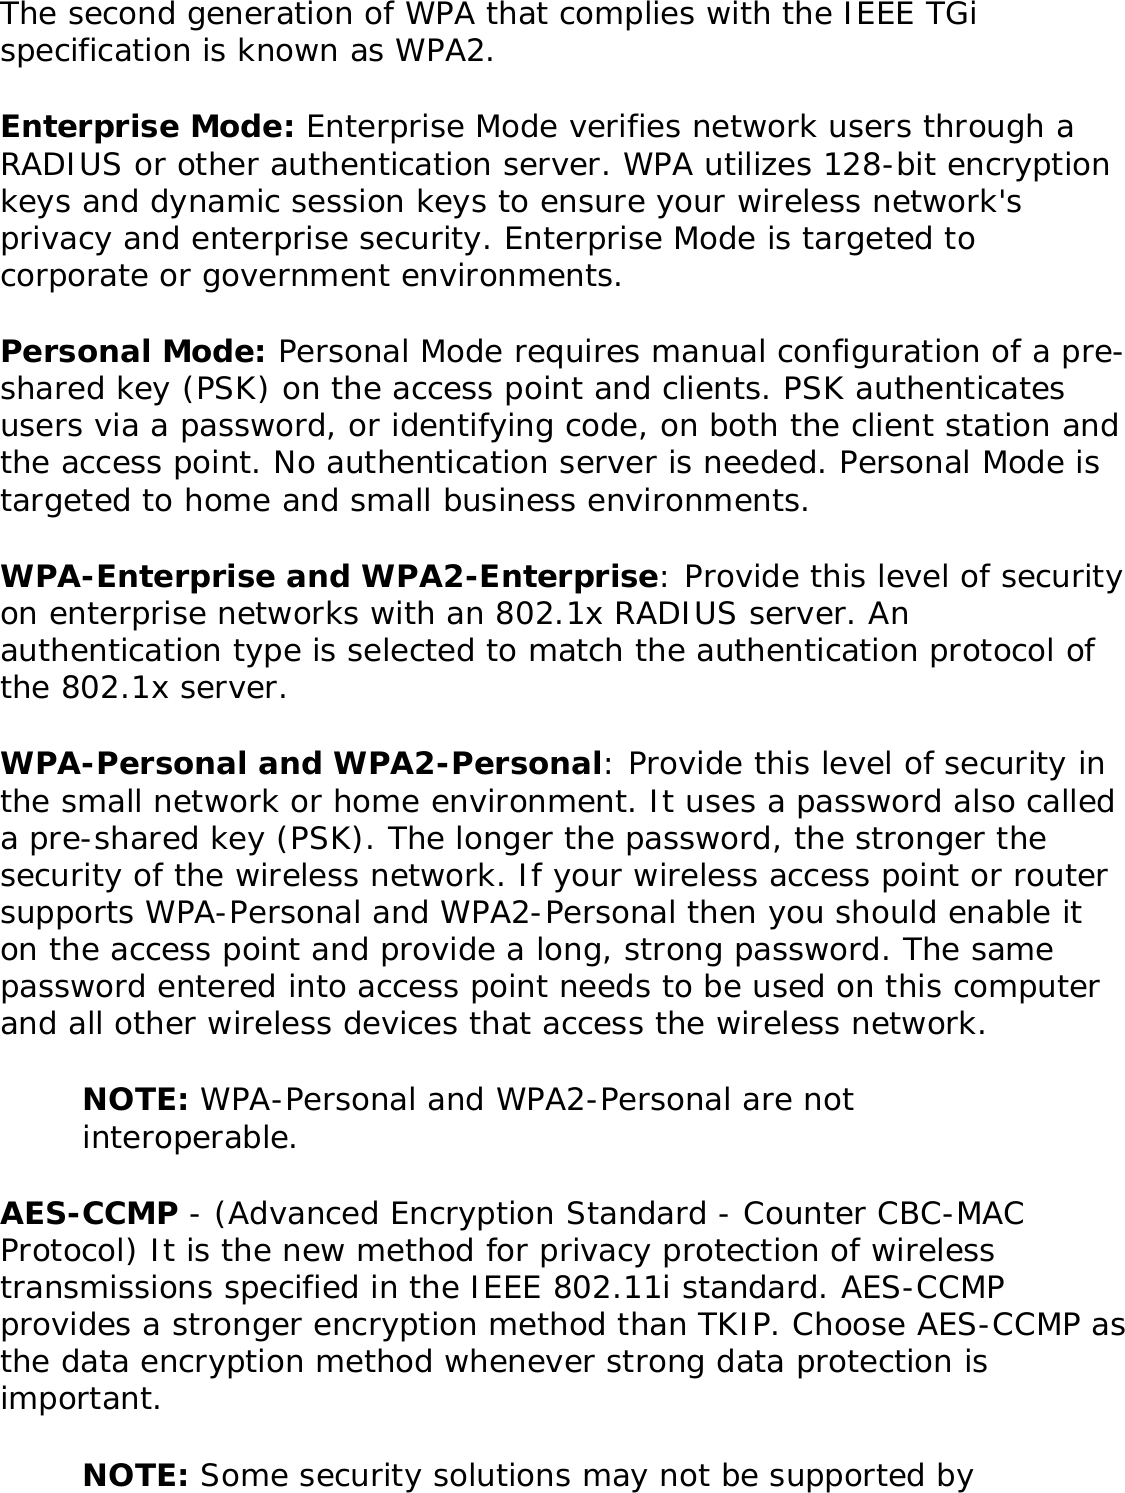 The second generation of WPA that complies with the IEEE TGi specification is known as WPA2. Enterprise Mode: Enterprise Mode verifies network users through a RADIUS or other authentication server. WPA utilizes 128-bit encryption keys and dynamic session keys to ensure your wireless network&apos;s privacy and enterprise security. Enterprise Mode is targeted to corporate or government environments. Personal Mode: Personal Mode requires manual configuration of a pre-shared key (PSK) on the access point and clients. PSK authenticates users via a password, or identifying code, on both the client station and the access point. No authentication server is needed. Personal Mode is targeted to home and small business environments. WPA-Enterprise and WPA2-Enterprise: Provide this level of security on enterprise networks with an 802.1x RADIUS server. An authentication type is selected to match the authentication protocol of the 802.1x server. WPA-Personal and WPA2-Personal: Provide this level of security in the small network or home environment. It uses a password also called a pre-shared key (PSK). The longer the password, the stronger the security of the wireless network. If your wireless access point or router supports WPA-Personal and WPA2-Personal then you should enable it on the access point and provide a long, strong password. The same password entered into access point needs to be used on this computer and all other wireless devices that access the wireless network. NOTE: WPA-Personal and WPA2-Personal are not interoperable. AES-CCMP - (Advanced Encryption Standard - Counter CBC-MAC Protocol) It is the new method for privacy protection of wireless transmissions specified in the IEEE 802.11i standard. AES-CCMP provides a stronger encryption method than TKIP. Choose AES-CCMP as the data encryption method whenever strong data protection is important. NOTE: Some security solutions may not be supported by 